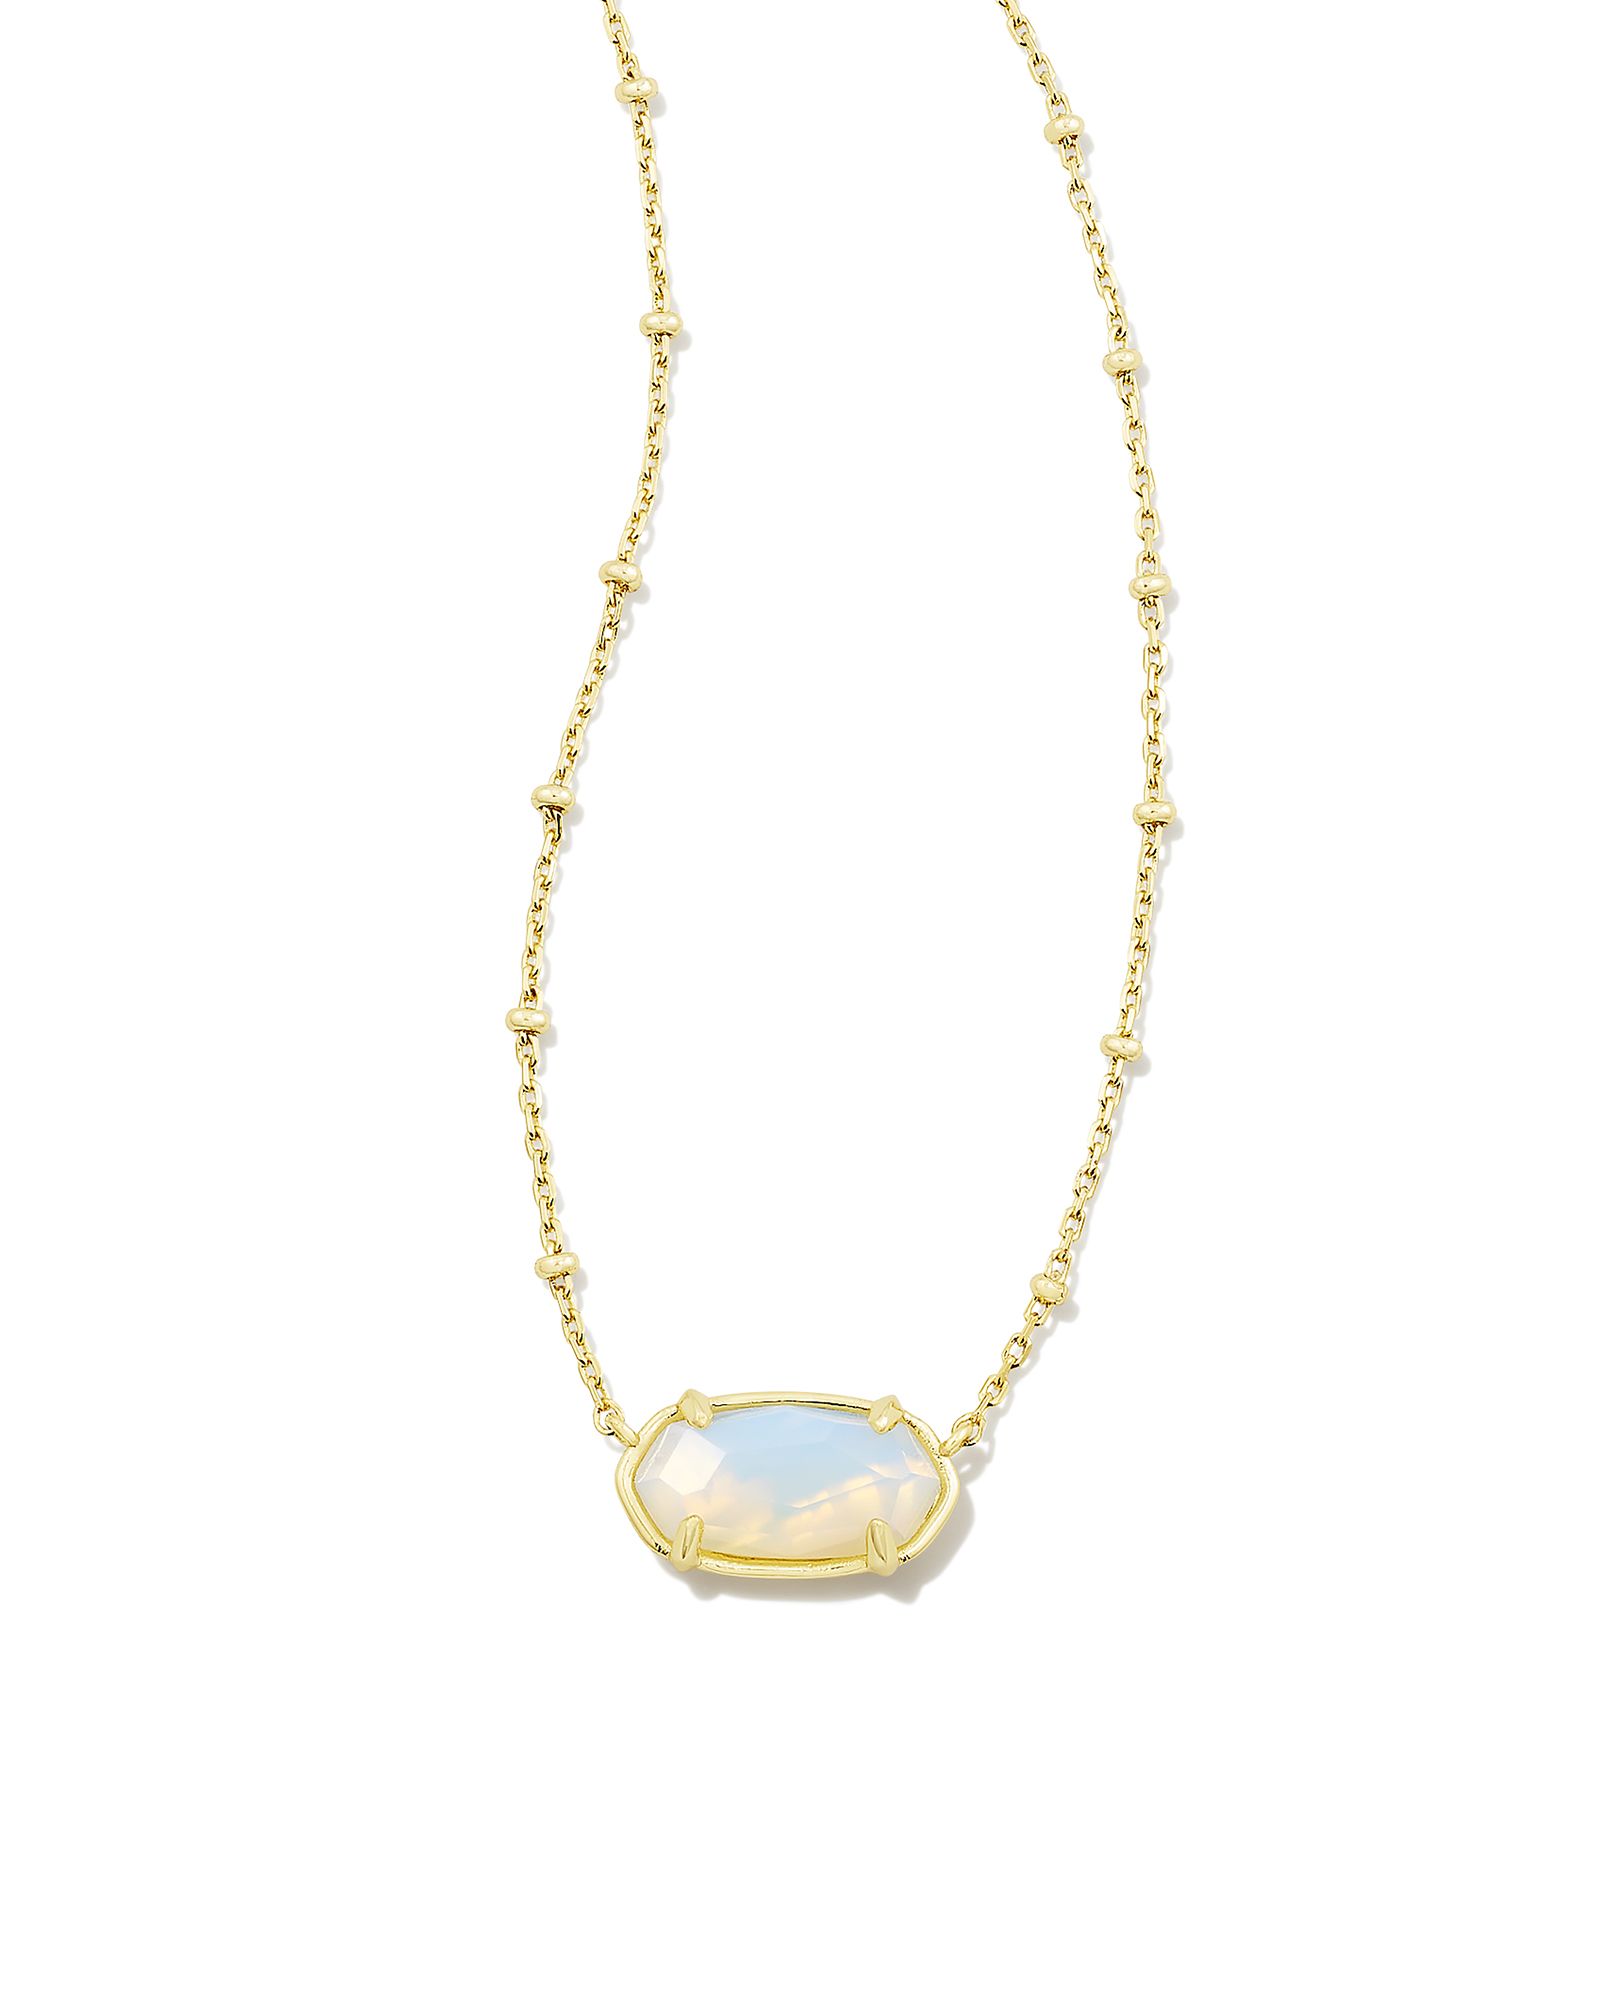 Faceted Gold Elisa Short Pendant Necklace in Iridescent Opalite Illusion | Kendra Scott